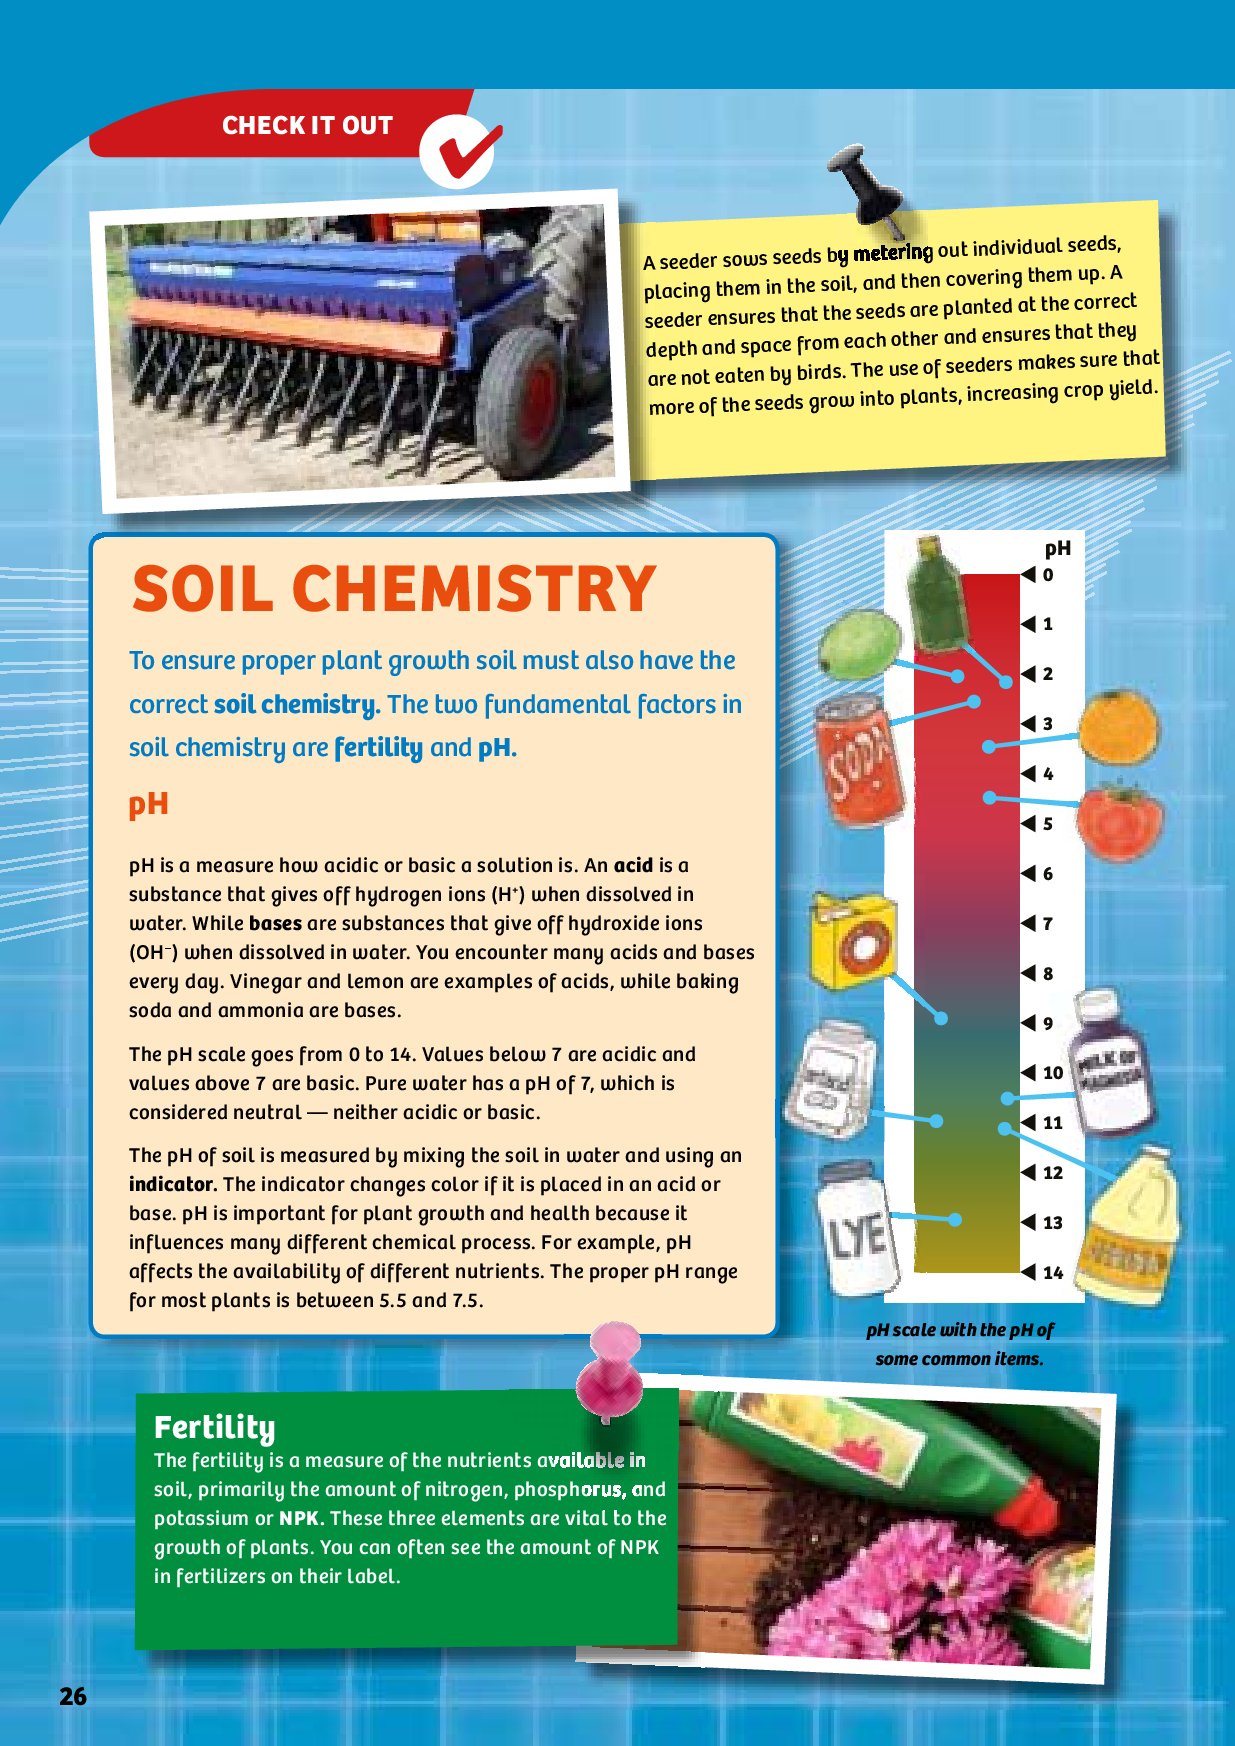 pH scale with the pH of some common items.To ensure proper plant growth soil must also have the correct soil chemistry. The two fundamental factors in soil chemistry are fertility and pH.SOIL CHEMISTRYpH is a measure how acidic or basic a solution is. An acid is a substance that gives off hydrogen ions (H+) when dissolved in water. While bases are substances that give off hydroxide ions (OH–) when dissolved in water. You encounter many acids and bases every day. Vinegar and lemon are examples of acids, while baking soda and ammonia are bases.The pH scale goes from  to . Values below  are acidic and values above  are basic. Pure water has a pH of , which is considered neutral — neither acidic or basic.The pH of soil is measured by mixing the soil in water and using an indicator. The indicator changes color if it is placed in an acid or base. pH is important for plant growth and health because it influences many different chemical process. For example, pH affects the availability of different nutrients. The proper pH range for most plants is between . and ..pHpH01234567891011121314The fertility is a measure of the nutrients available in soil, primarily the amount of nitrogen, phosphorus, and potassium or NPK. These three elements are vital to the growth of plants. You can often see the amount of NPK in fertilizers on their label.FertilityA seeder sows seeds by metering out individual seeds, placing them in the soil, and then covering them up. A seeder ensures that the seeds are planted at the correct depth and space from each other and ensures that they are not eaten by birds. The use of seeders makes sure that more of the seeds grow into plants, increasing crop yield.CHECK IT OUT